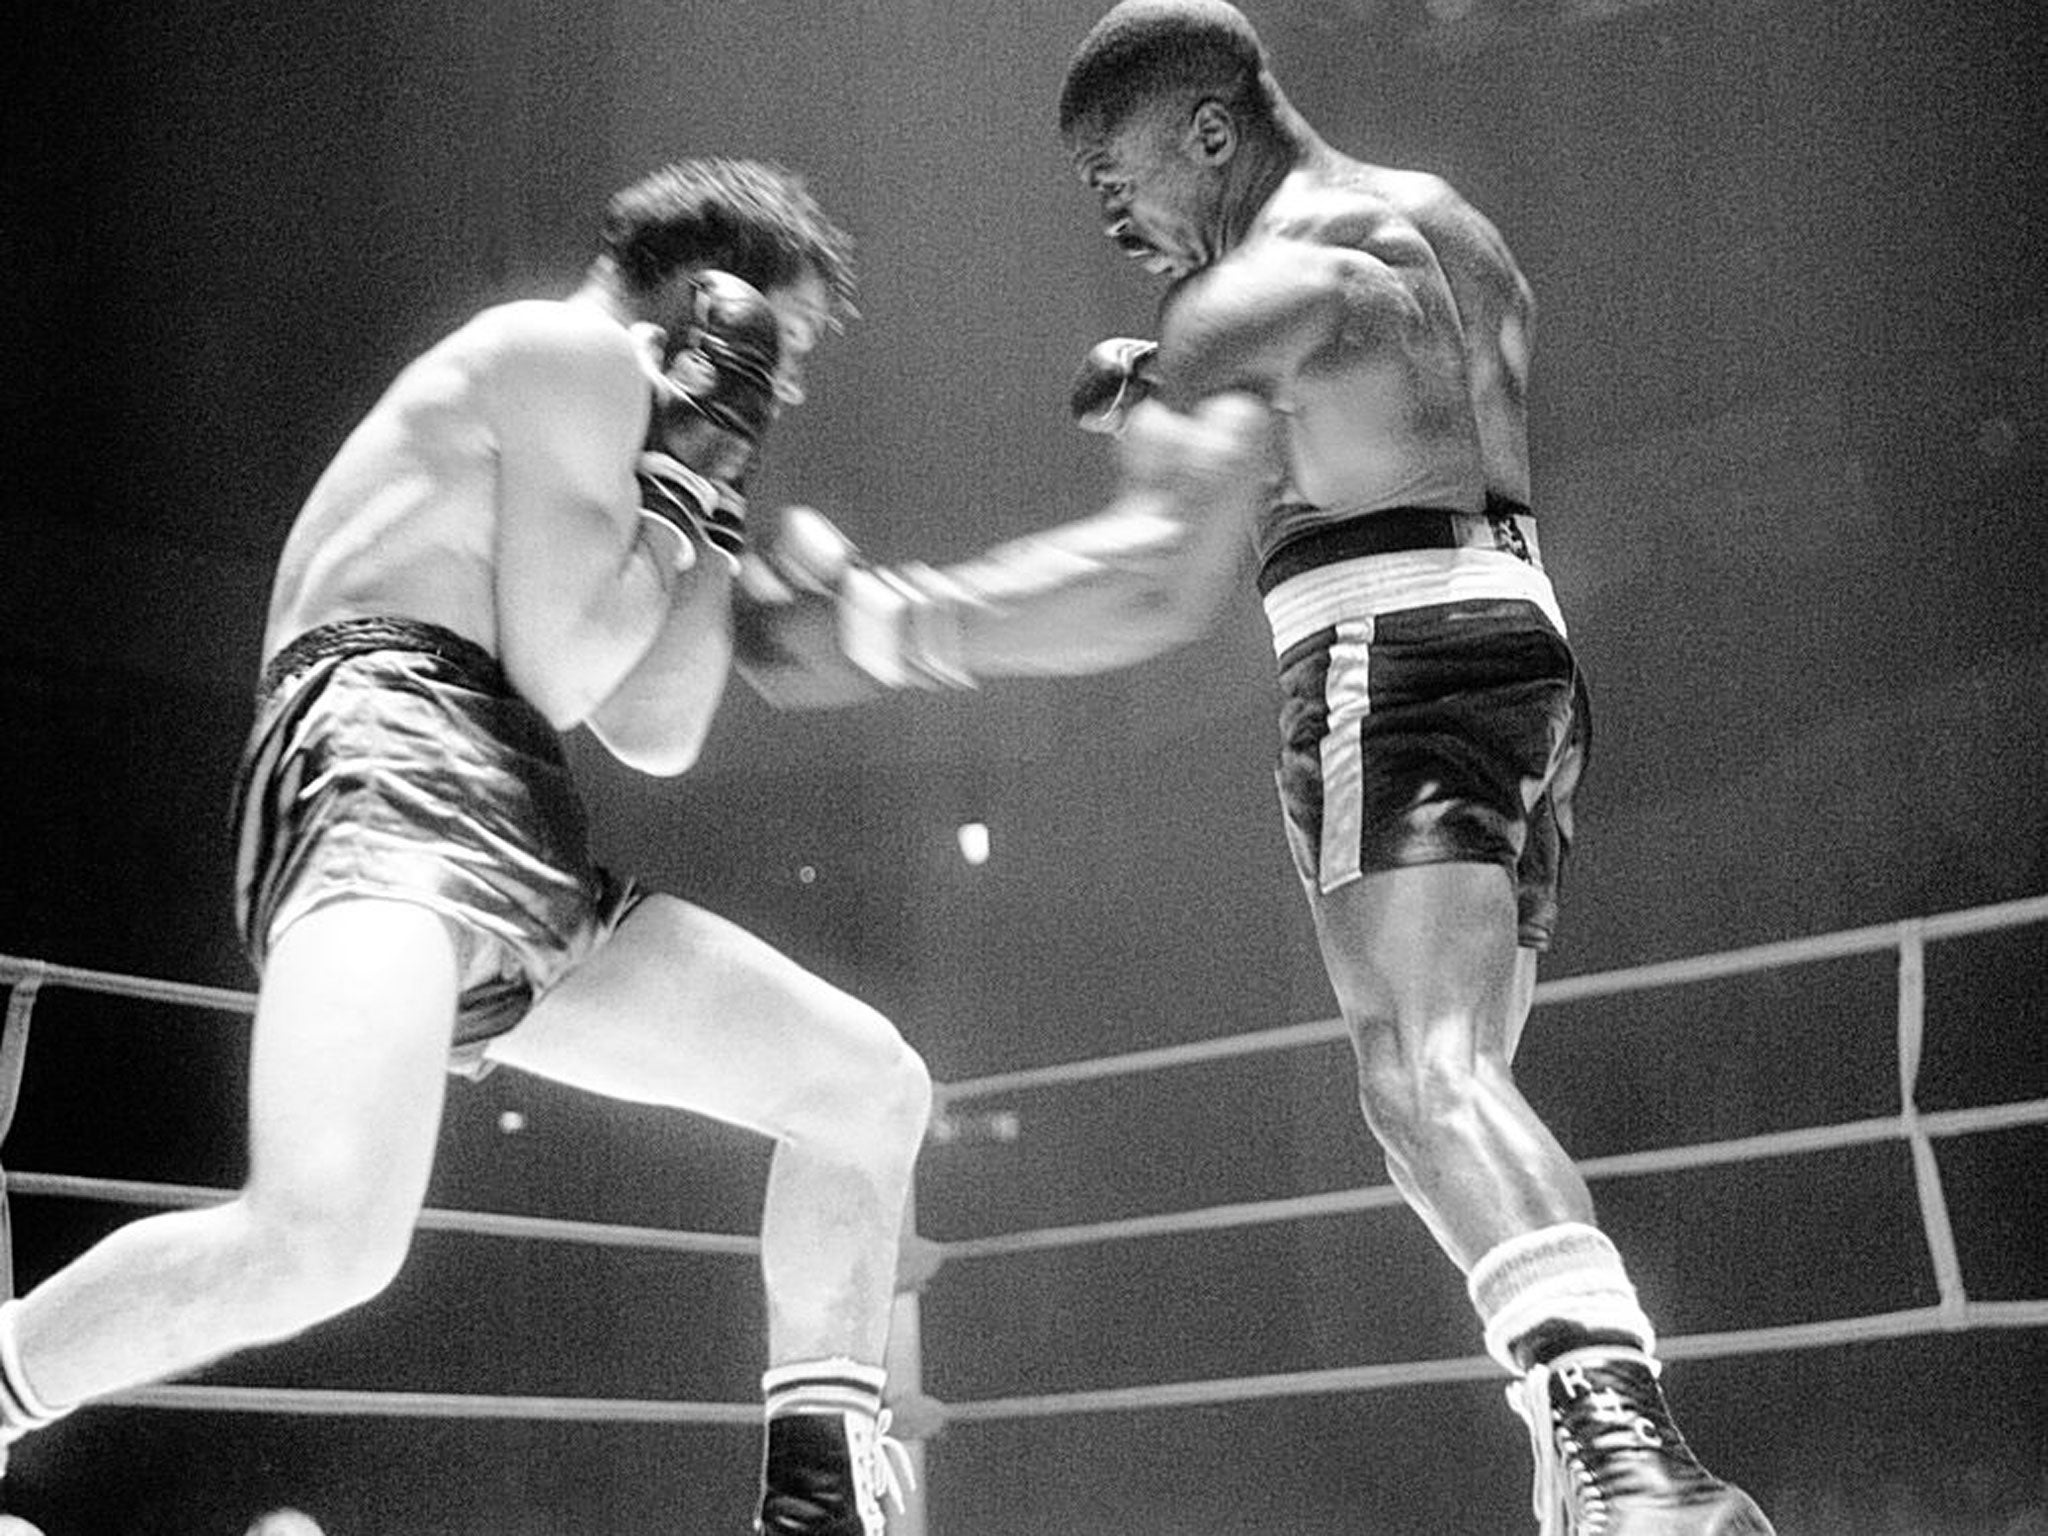 Carter, right, on his way to knocking out the Italian boxer Fabio Bettini in Paris in 1965